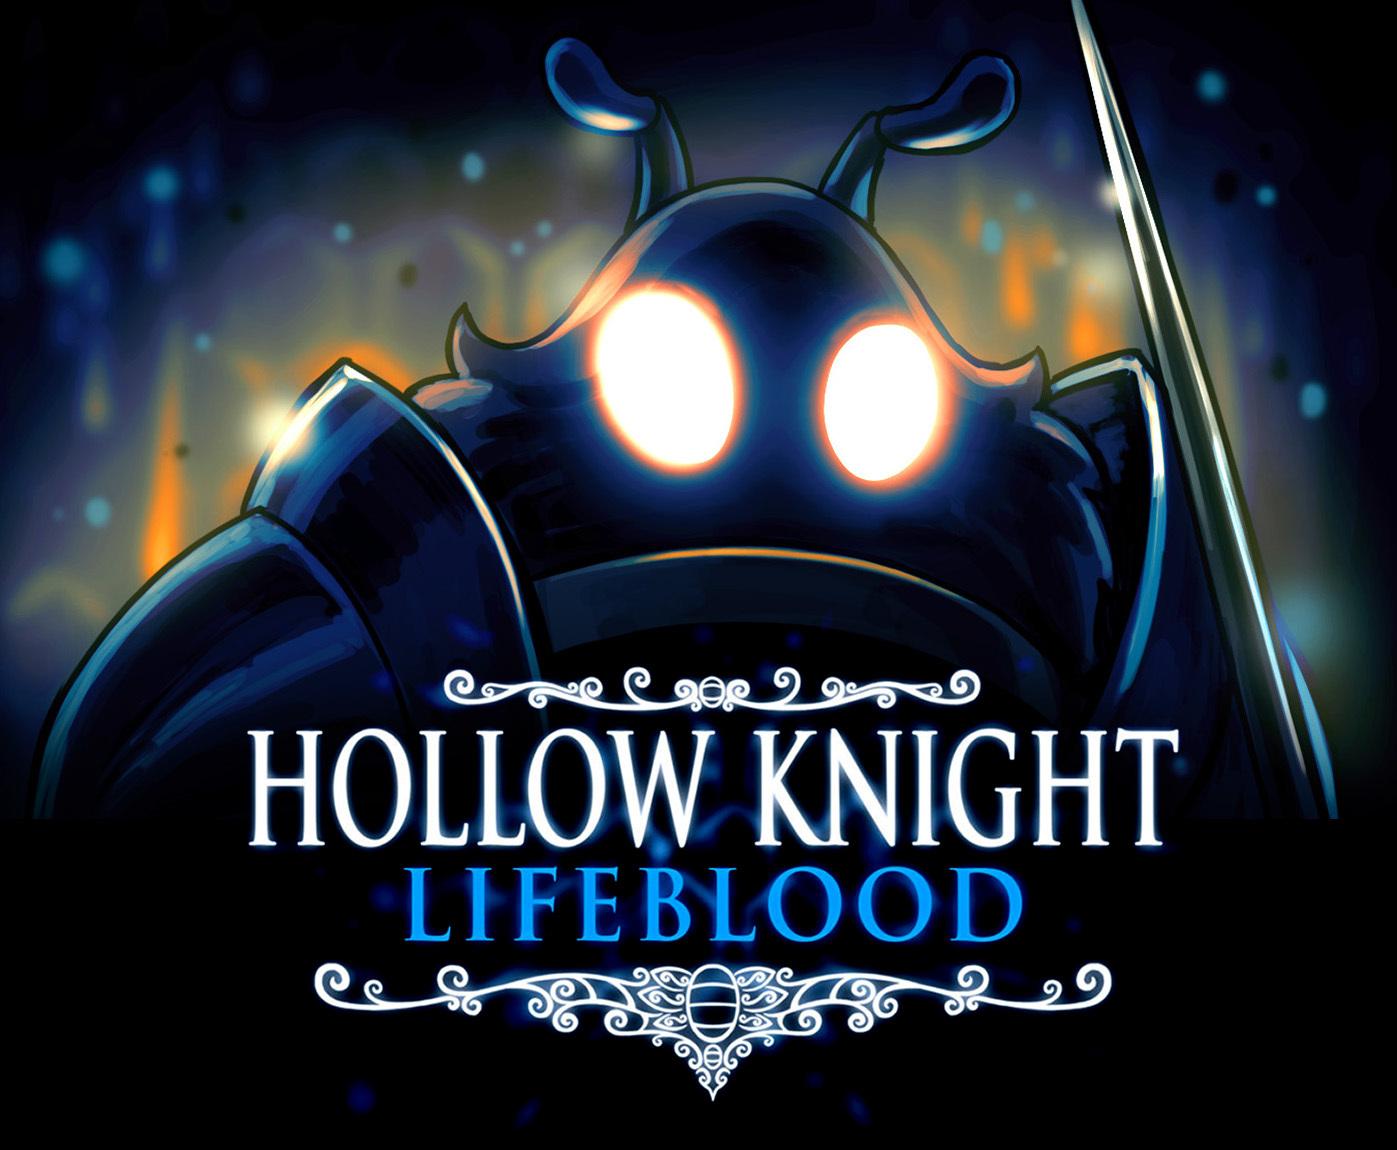 Hollow Knight Lifeblood Wallpapers - Wallpaper Cave